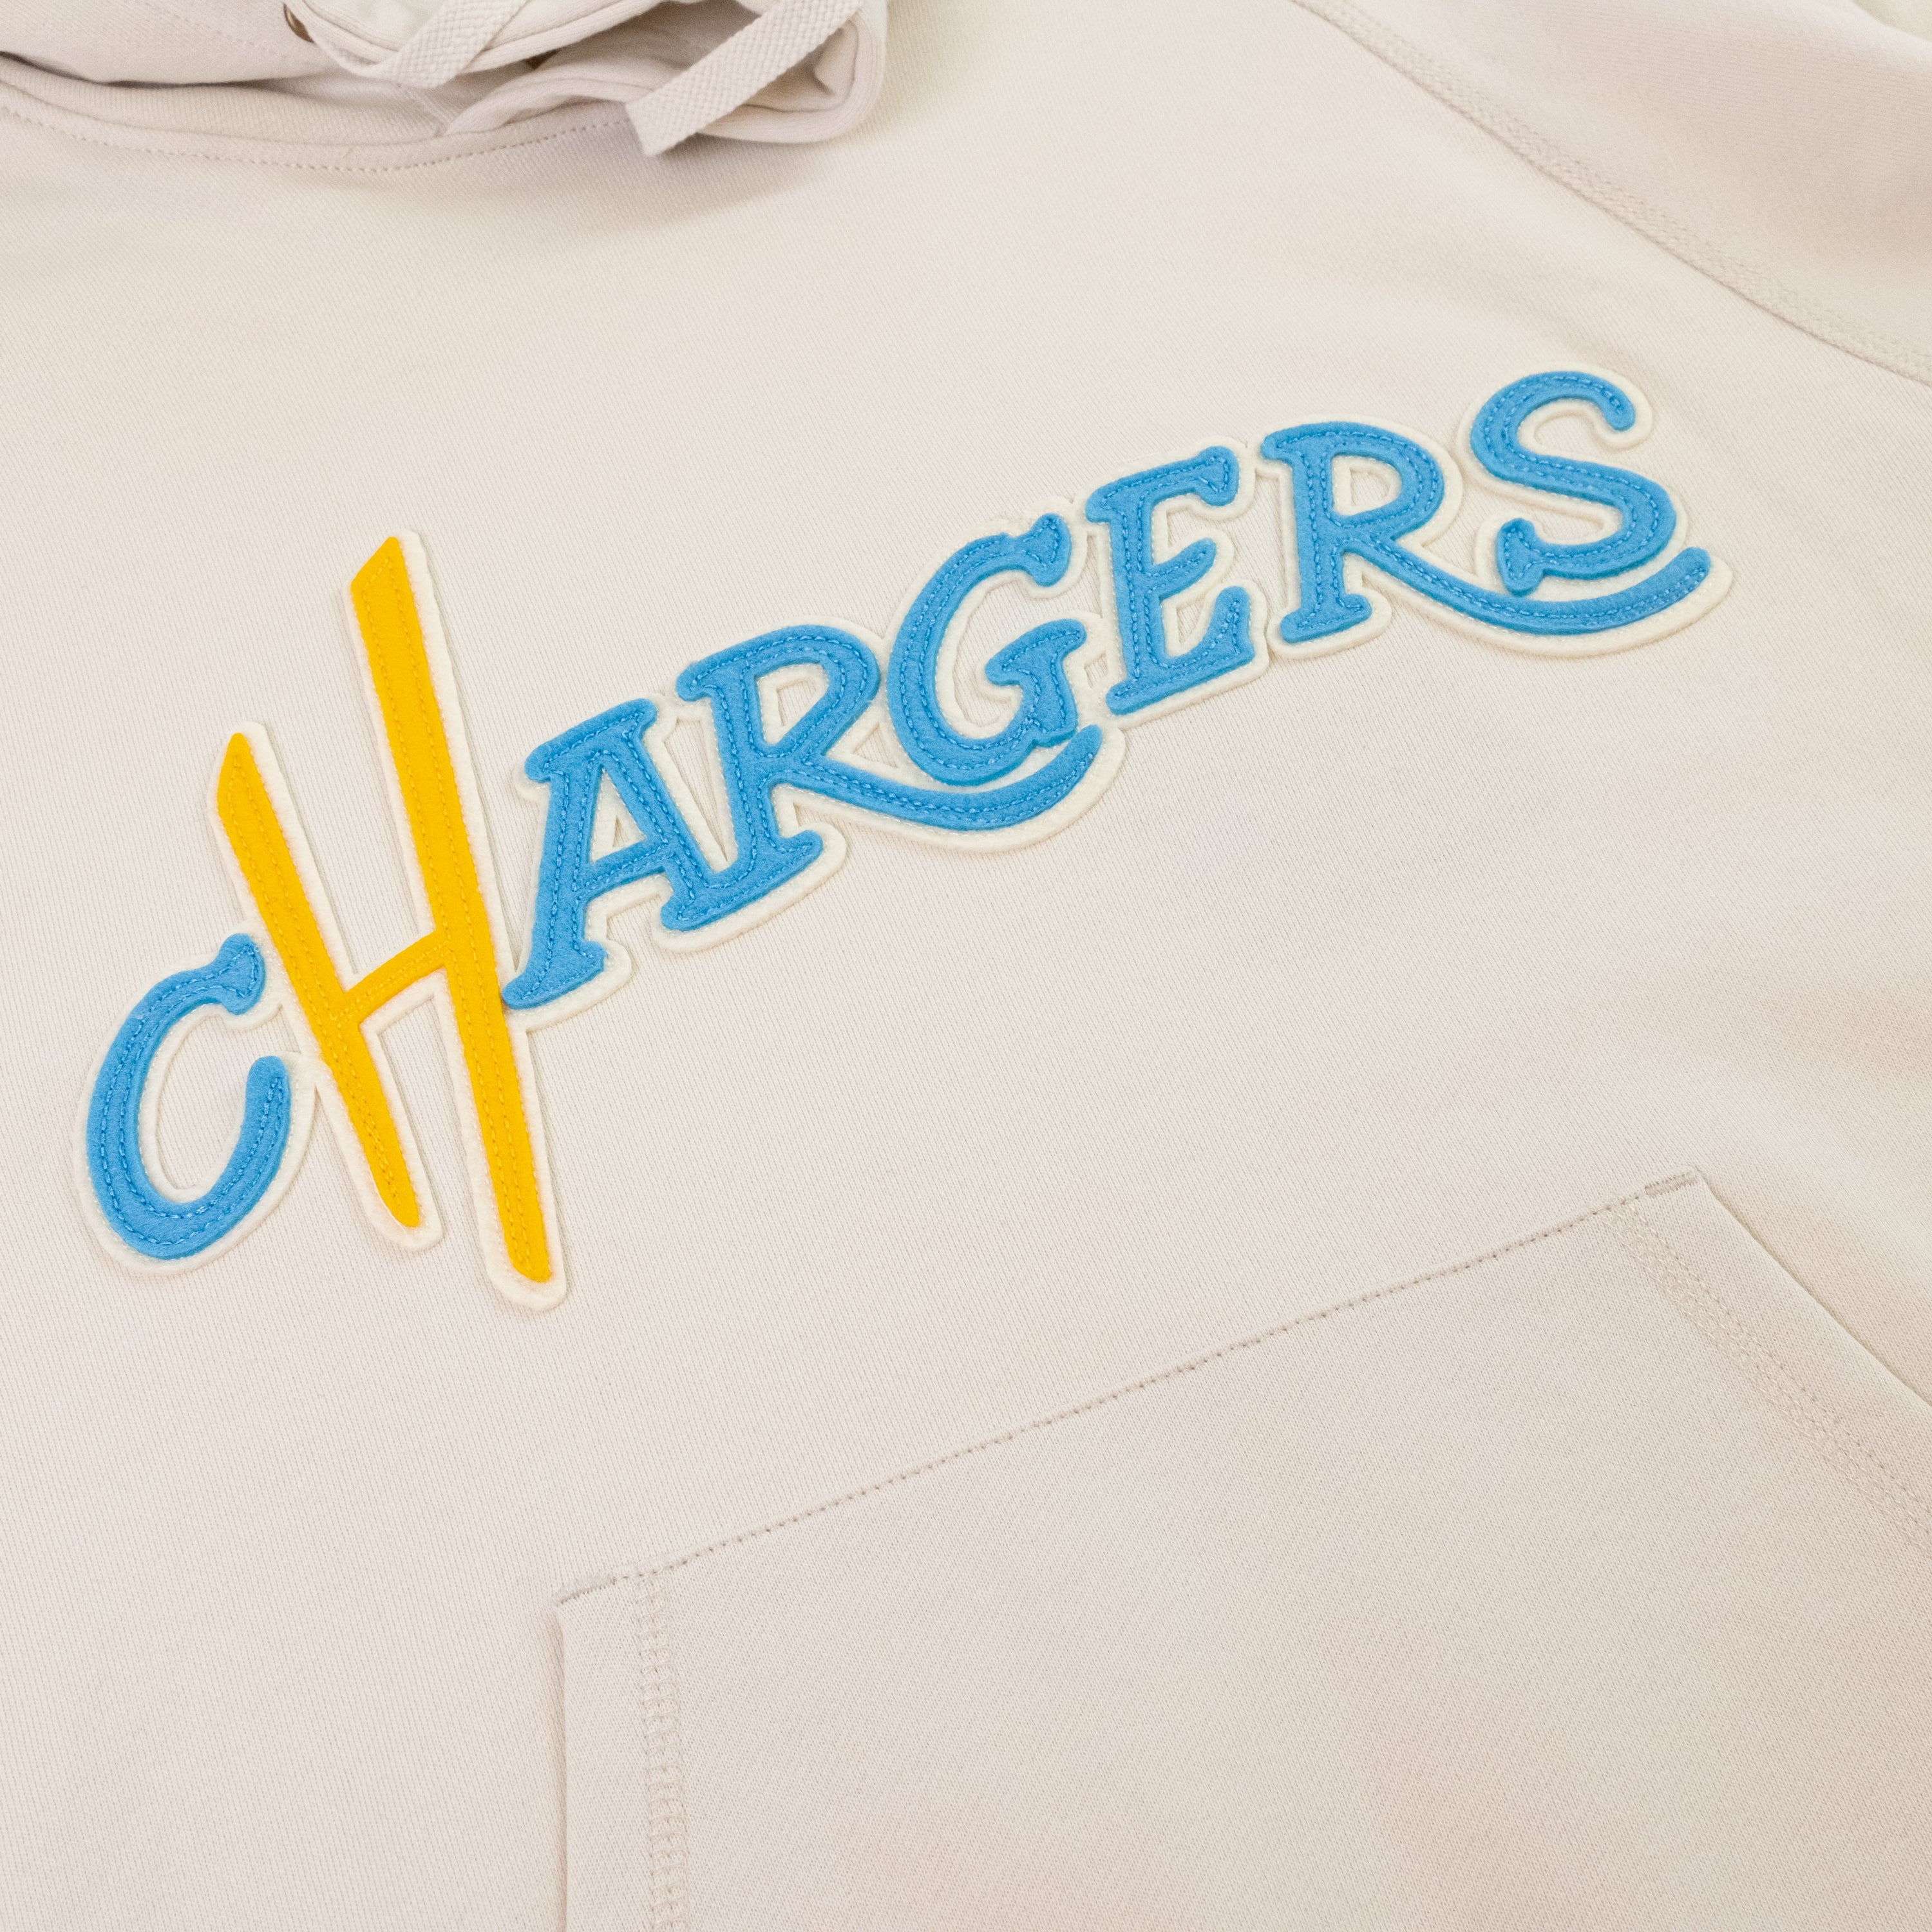 Los Angeles Chargers French Terry Hooded Sweatshirt